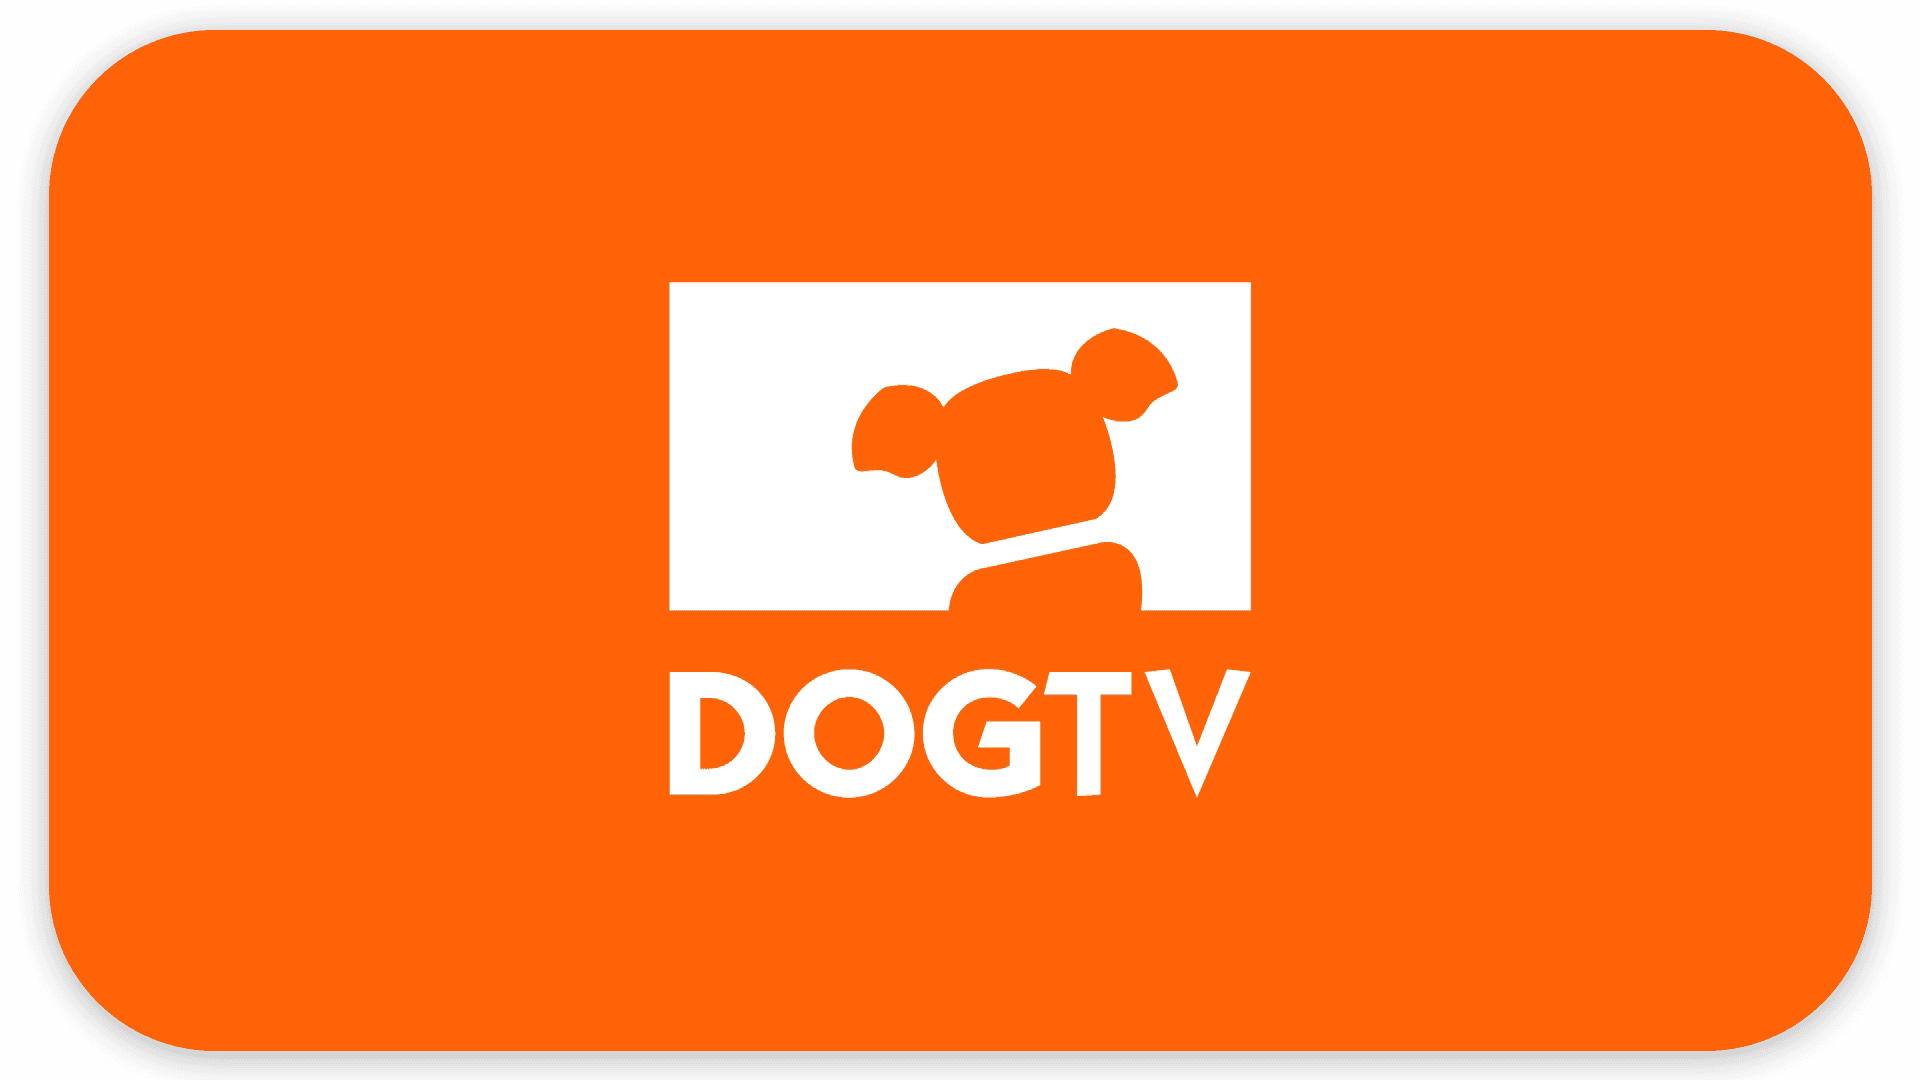 The DOGTV logo features a white abstract dog head inside a white rectangle above the word "DOGTV" on an orange background.